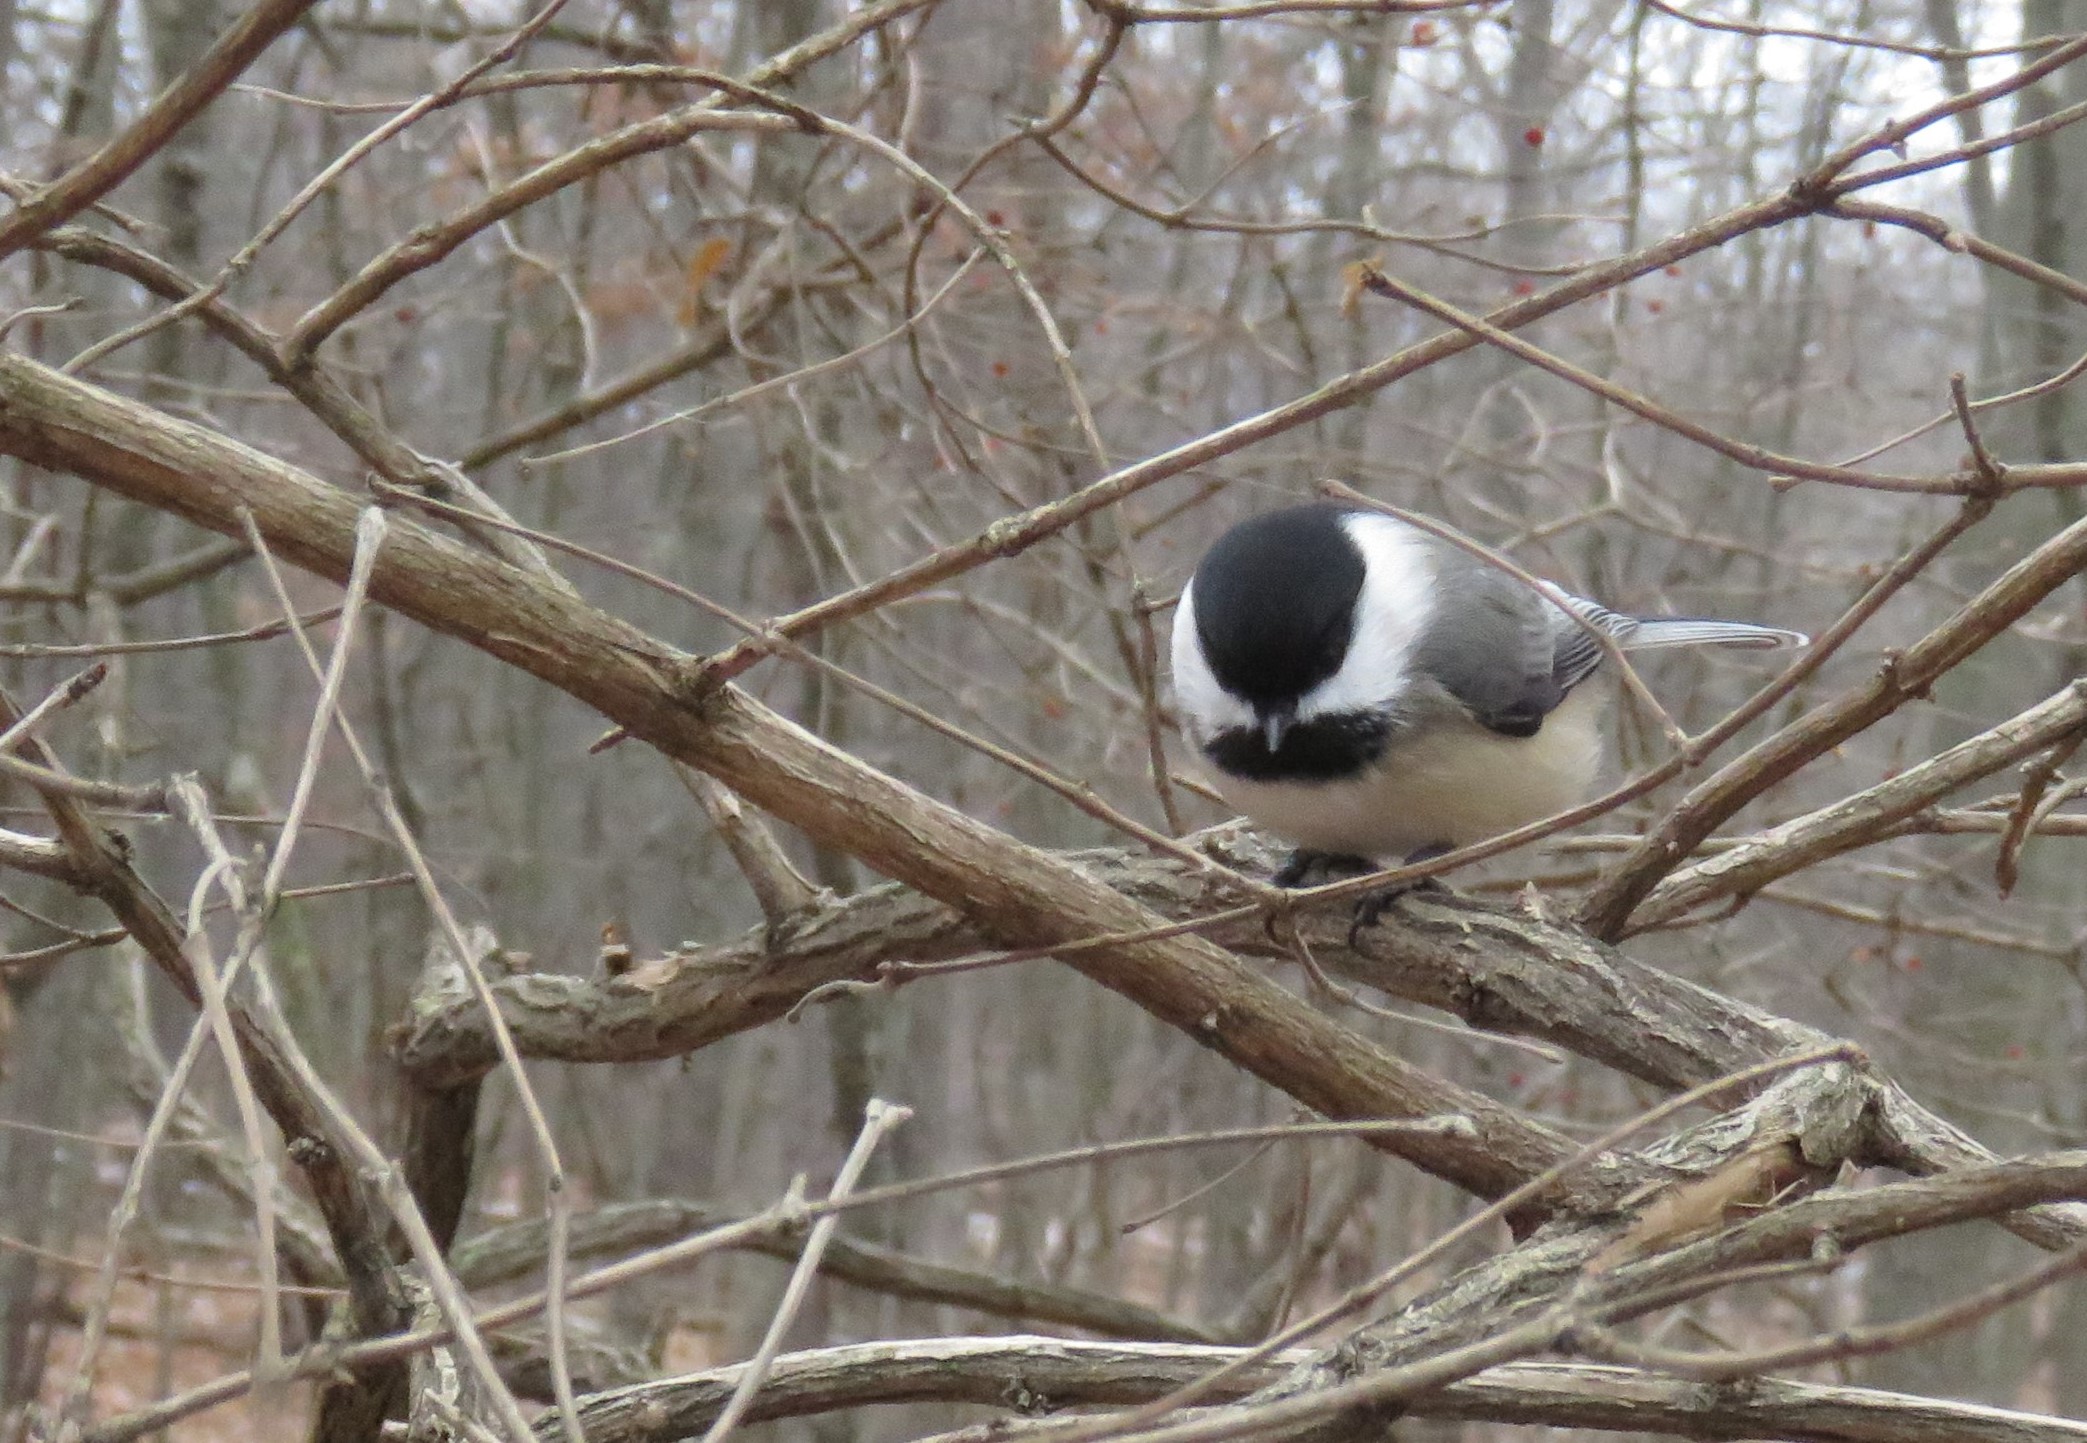 A Black-capped Chickadee perches among leafless branches